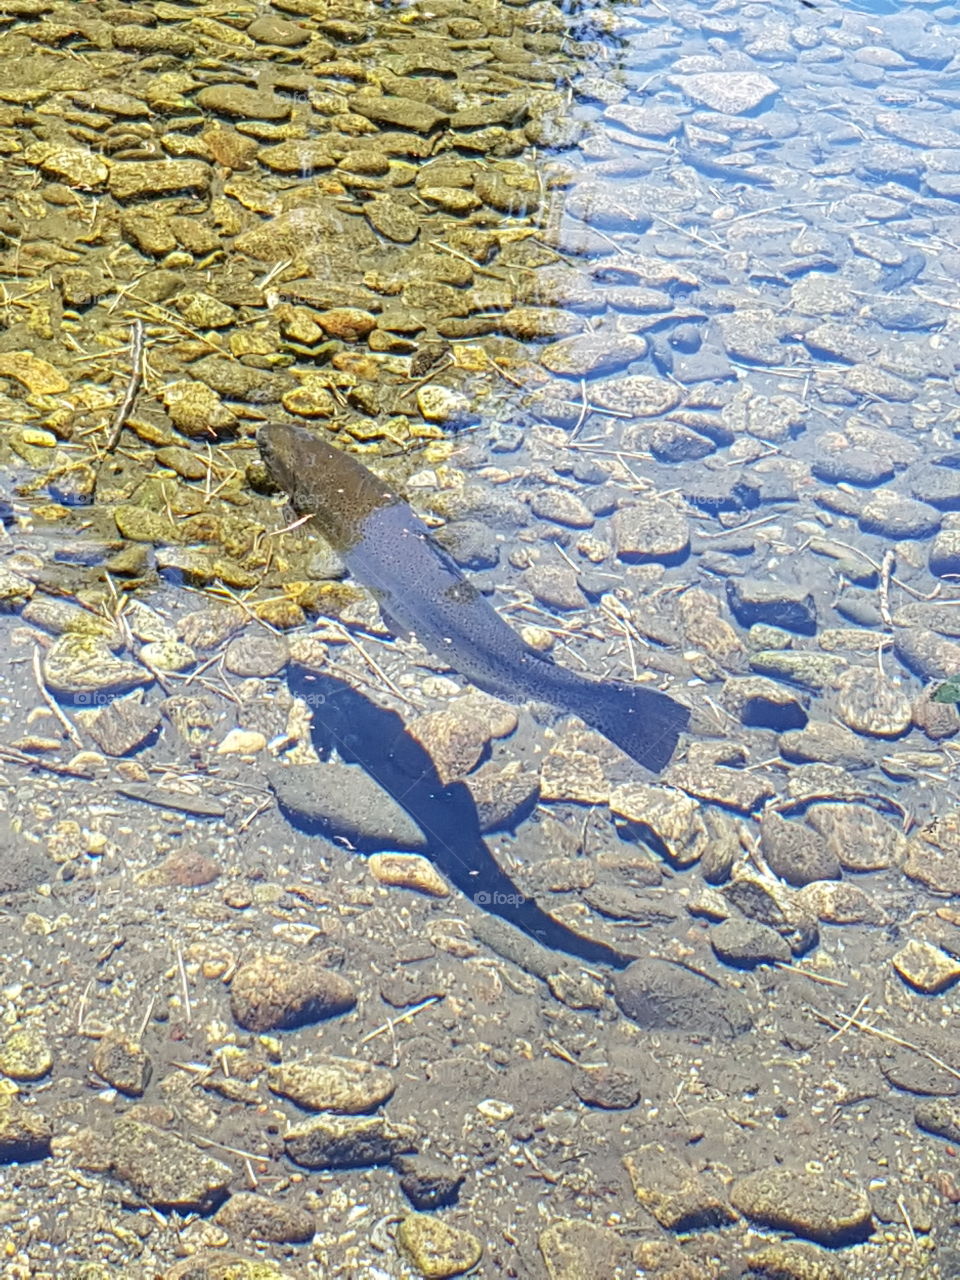 Swimming trout in a transparent mountain pond